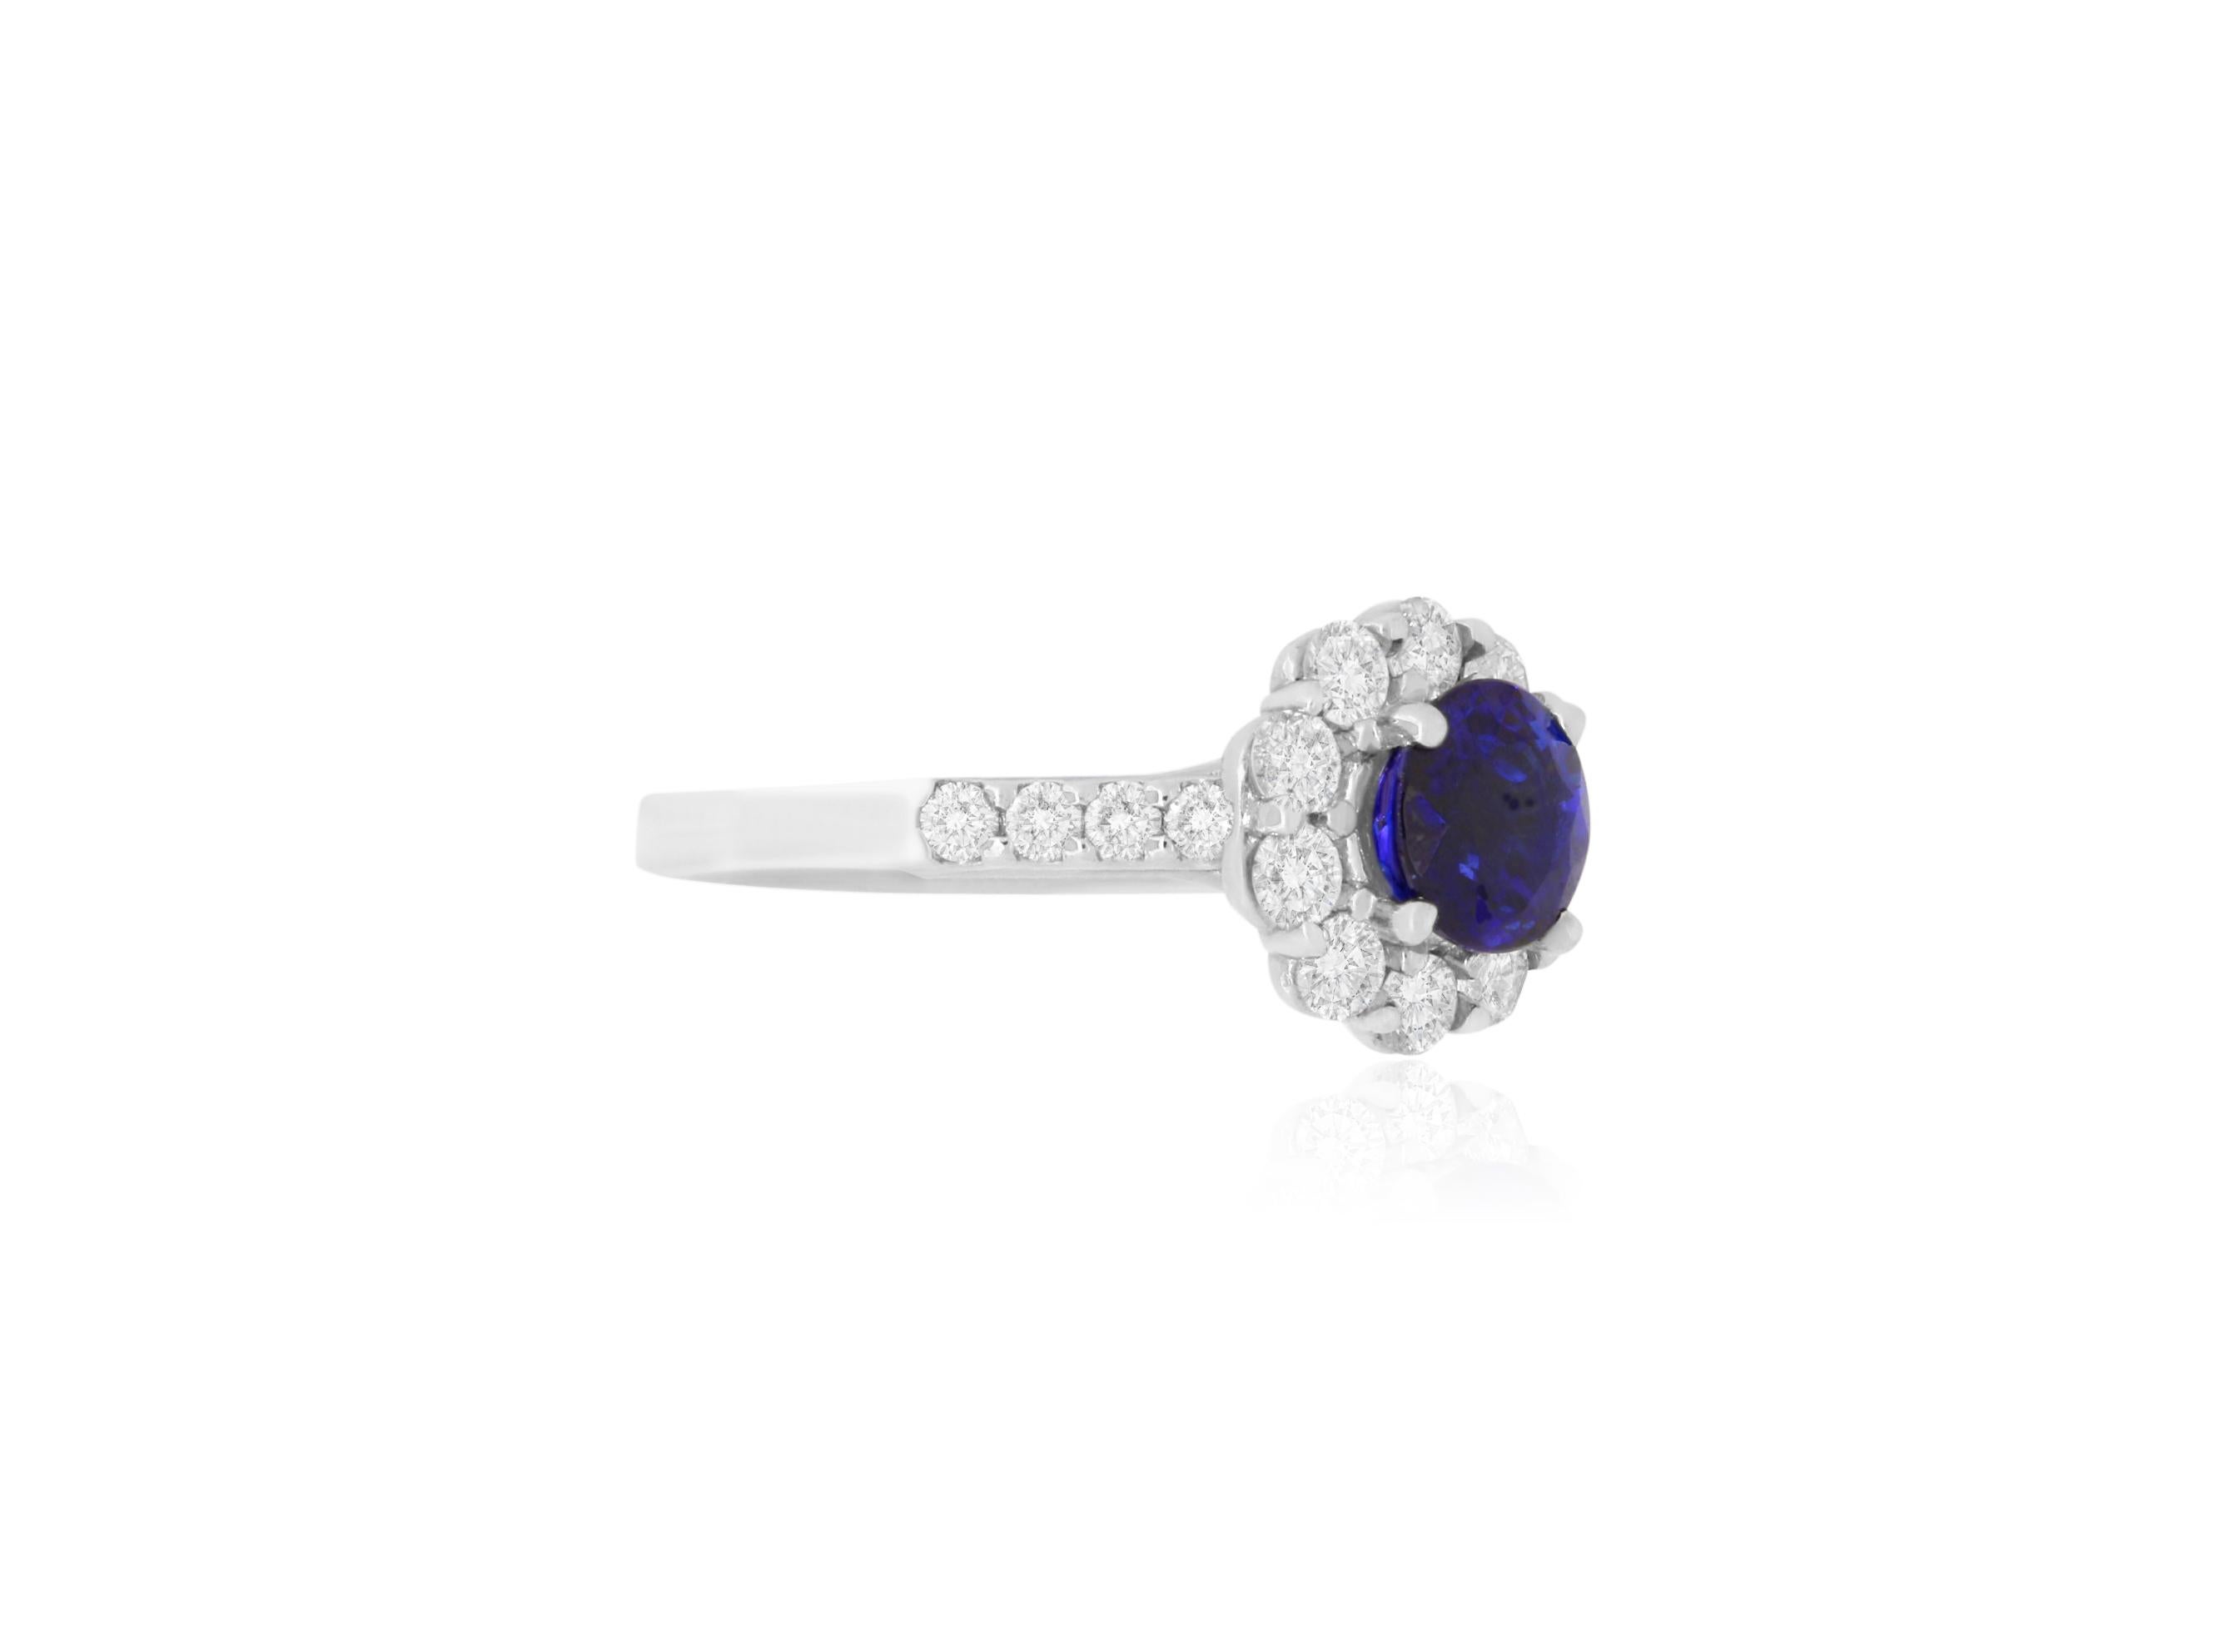 Material: 18k White Gold 
Center Stone Details:  1.72 Carat Round Blue Sapphire
Mounting Diamond Details: 18 Round White Diamonds Approximately 0.93 Carats - Clarity: SI / Color: H-I
Ring Size: Size 6.5 (can be sized)

Fine one-of-a kind